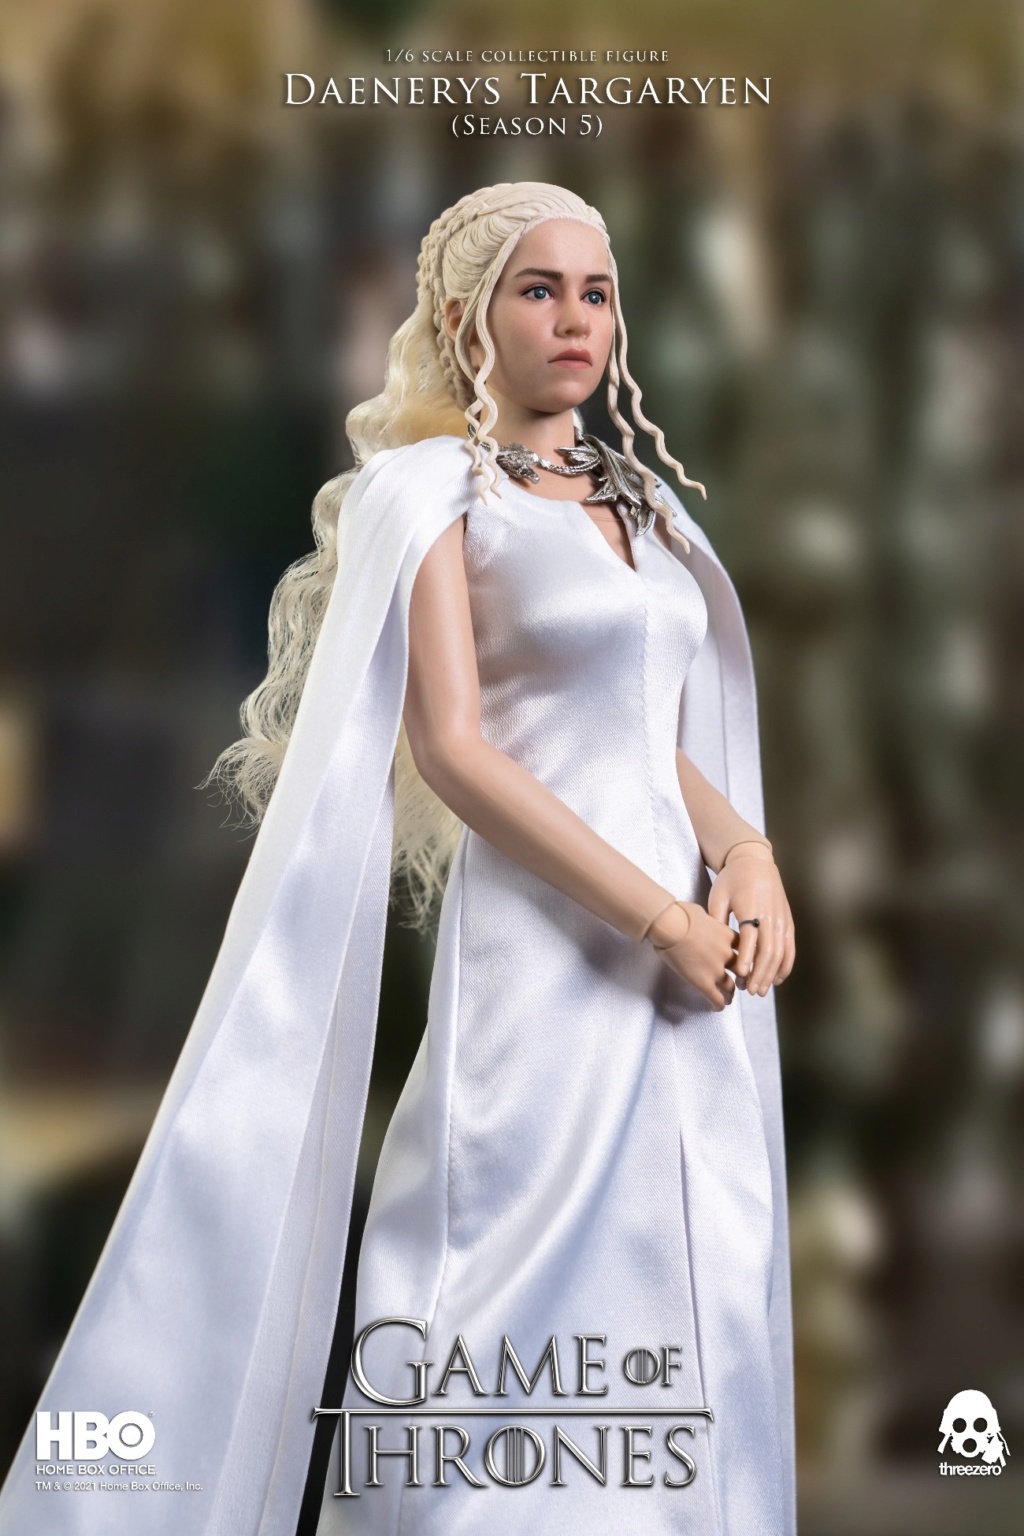 hbo - NEW PRODUCT: ThreeZero: 1/6 "A Song of Ice and Fire: Game of Thrones" 10th Anniversary Special Edition-Daenerys Targaryen 20134810